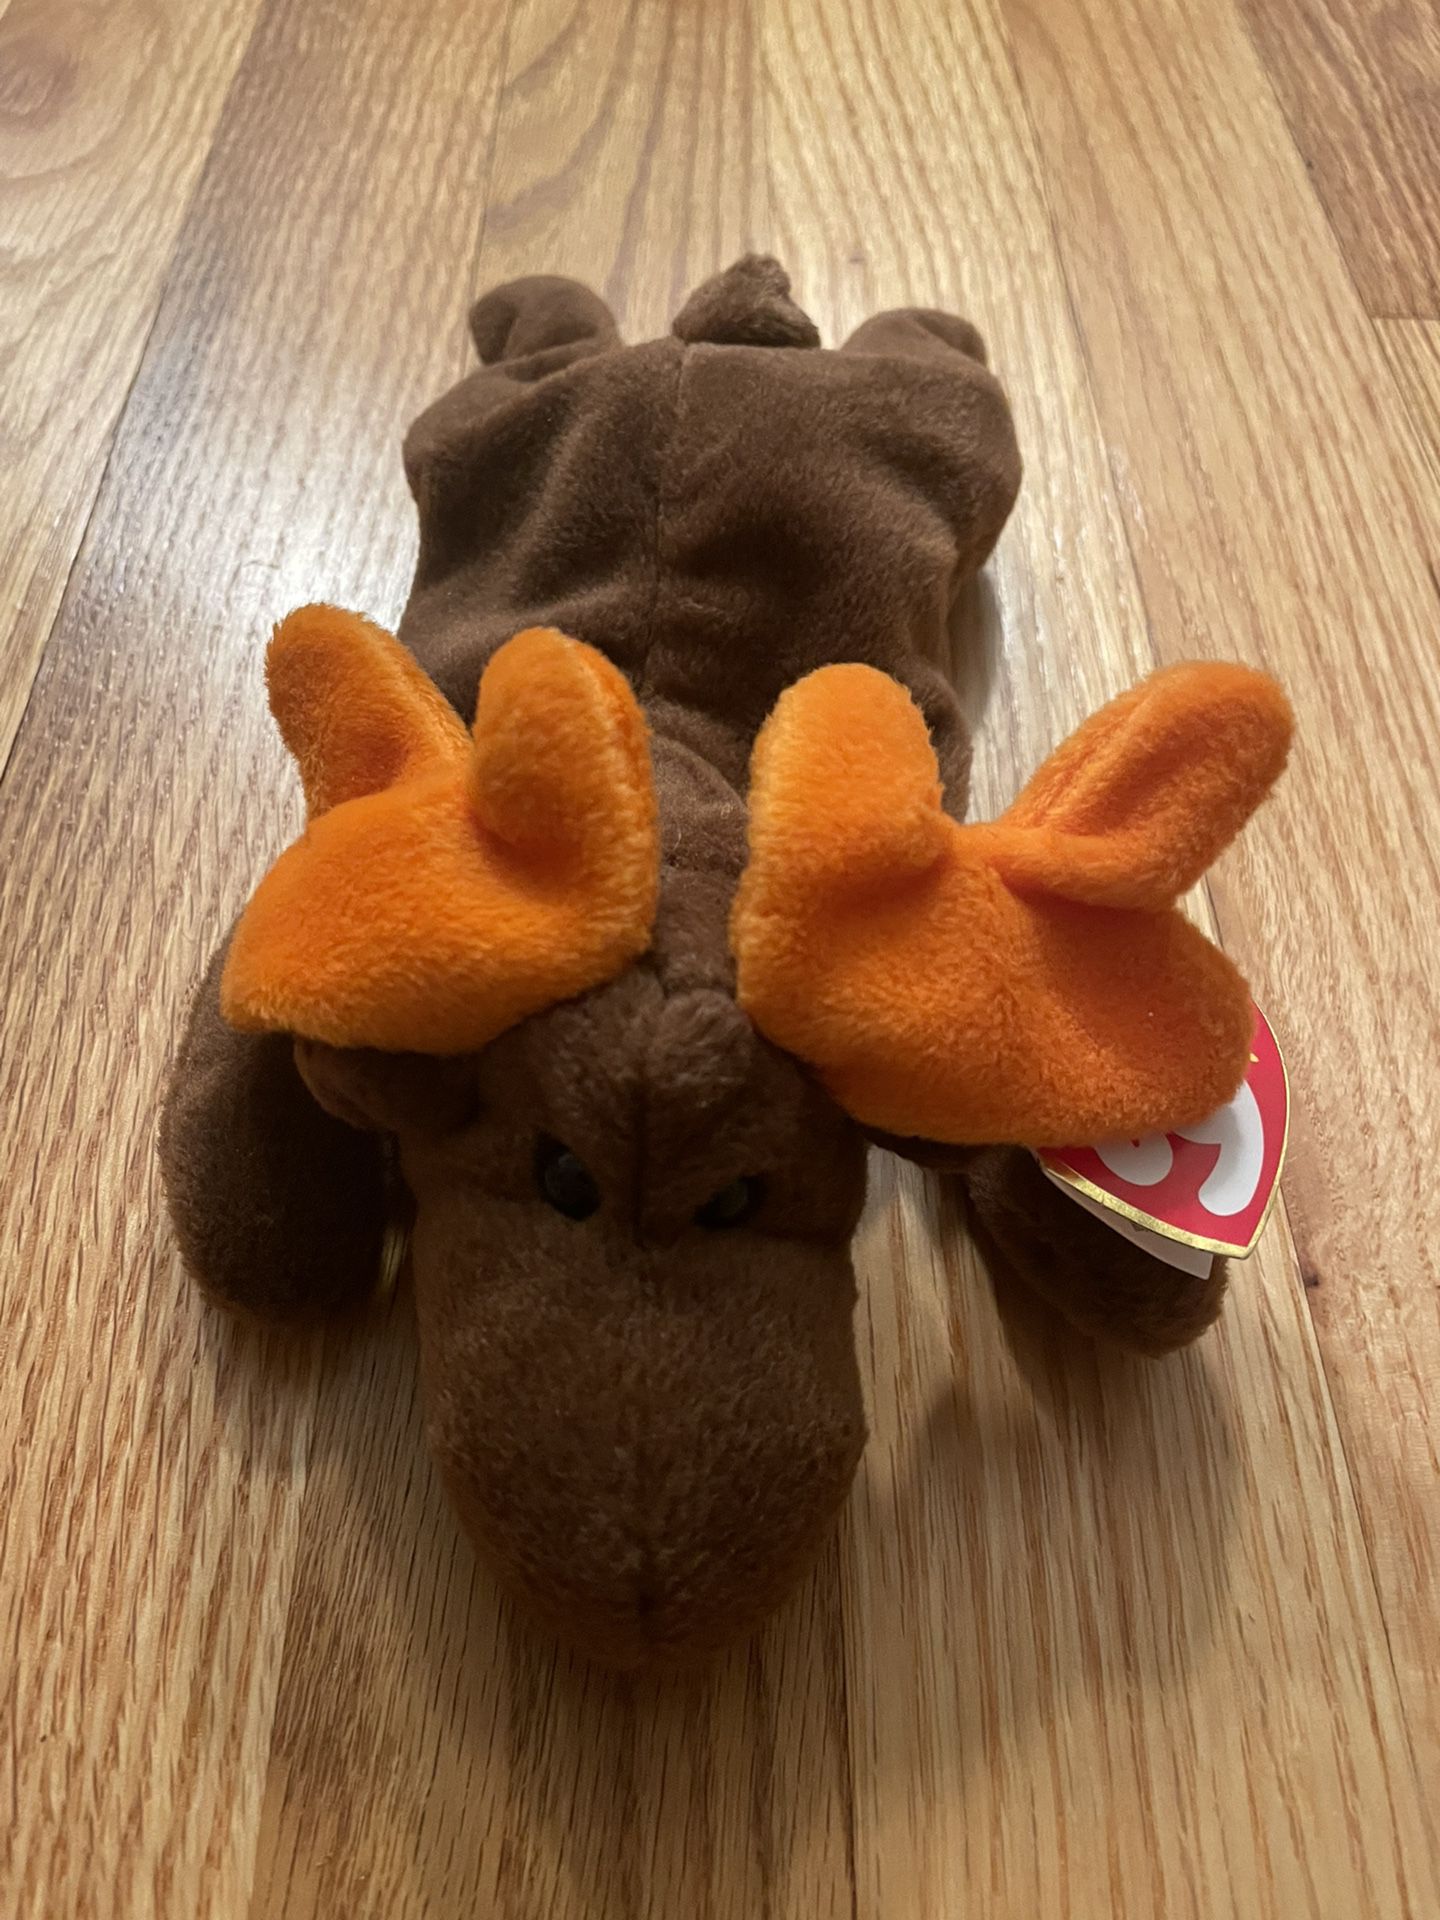  TY Beanie Baby Chocolate the Moose 4015 - With Errors.